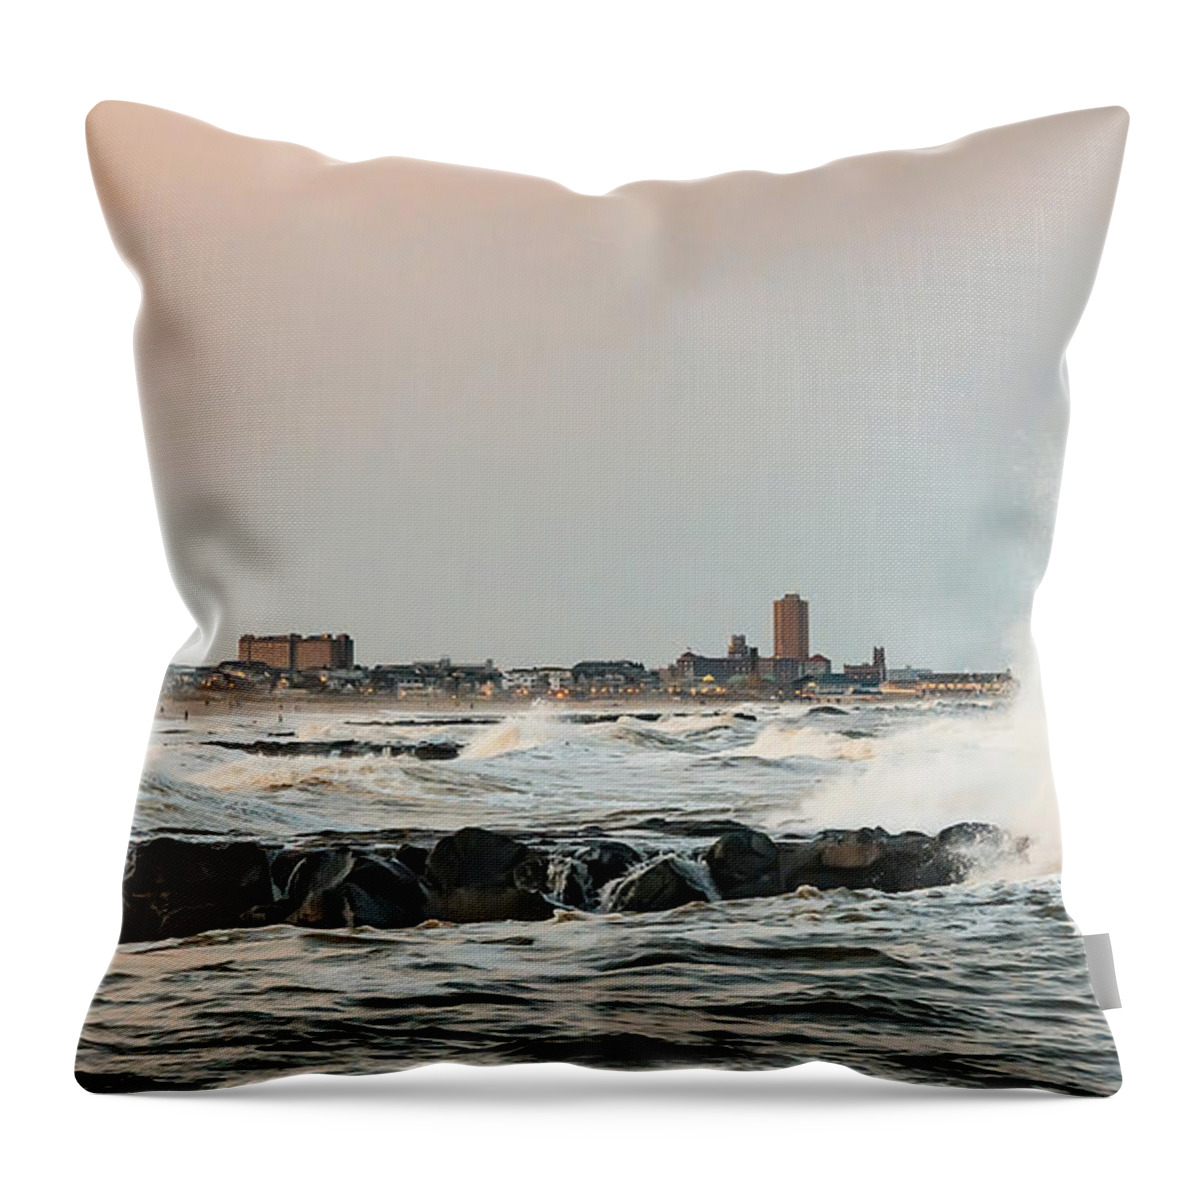 Shark River Inlet Throw Pillow featuring the photograph Battering The Shark River Inlet by Gary Slawsky